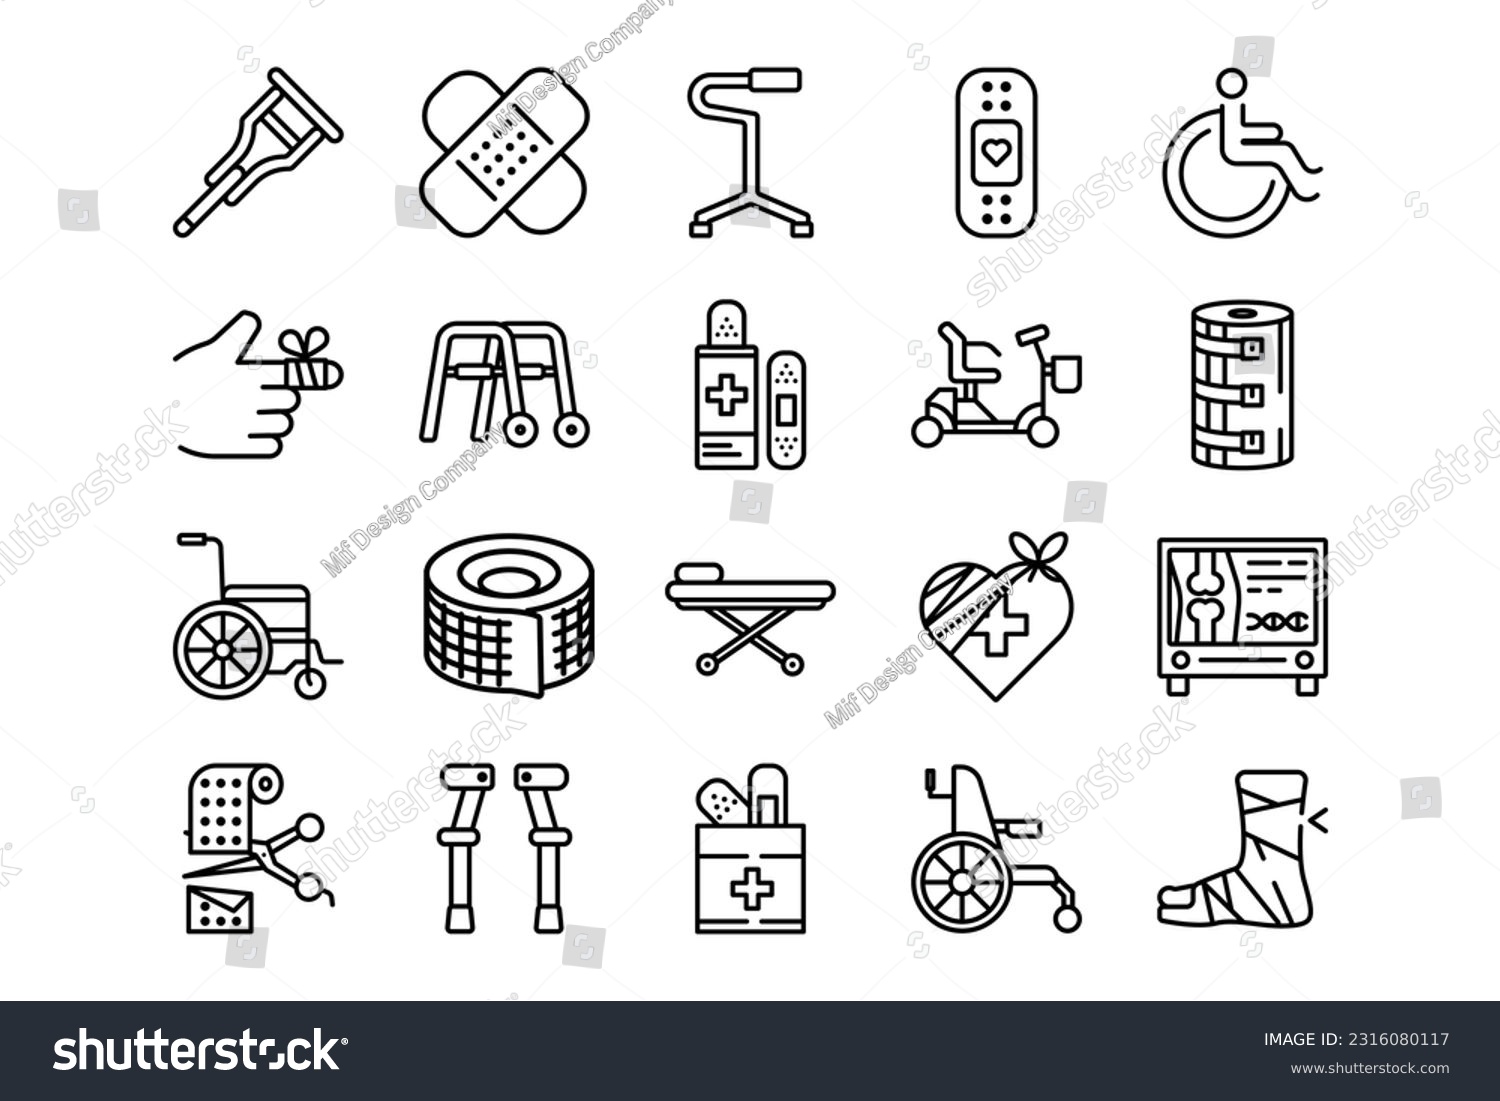 SVG of Plaster, Crutches and Bandage lines icon set. Plaster, Crutches and Bandage genres and attributes. Linear design. Lines with editable stroke. Isolated vector icons. svg